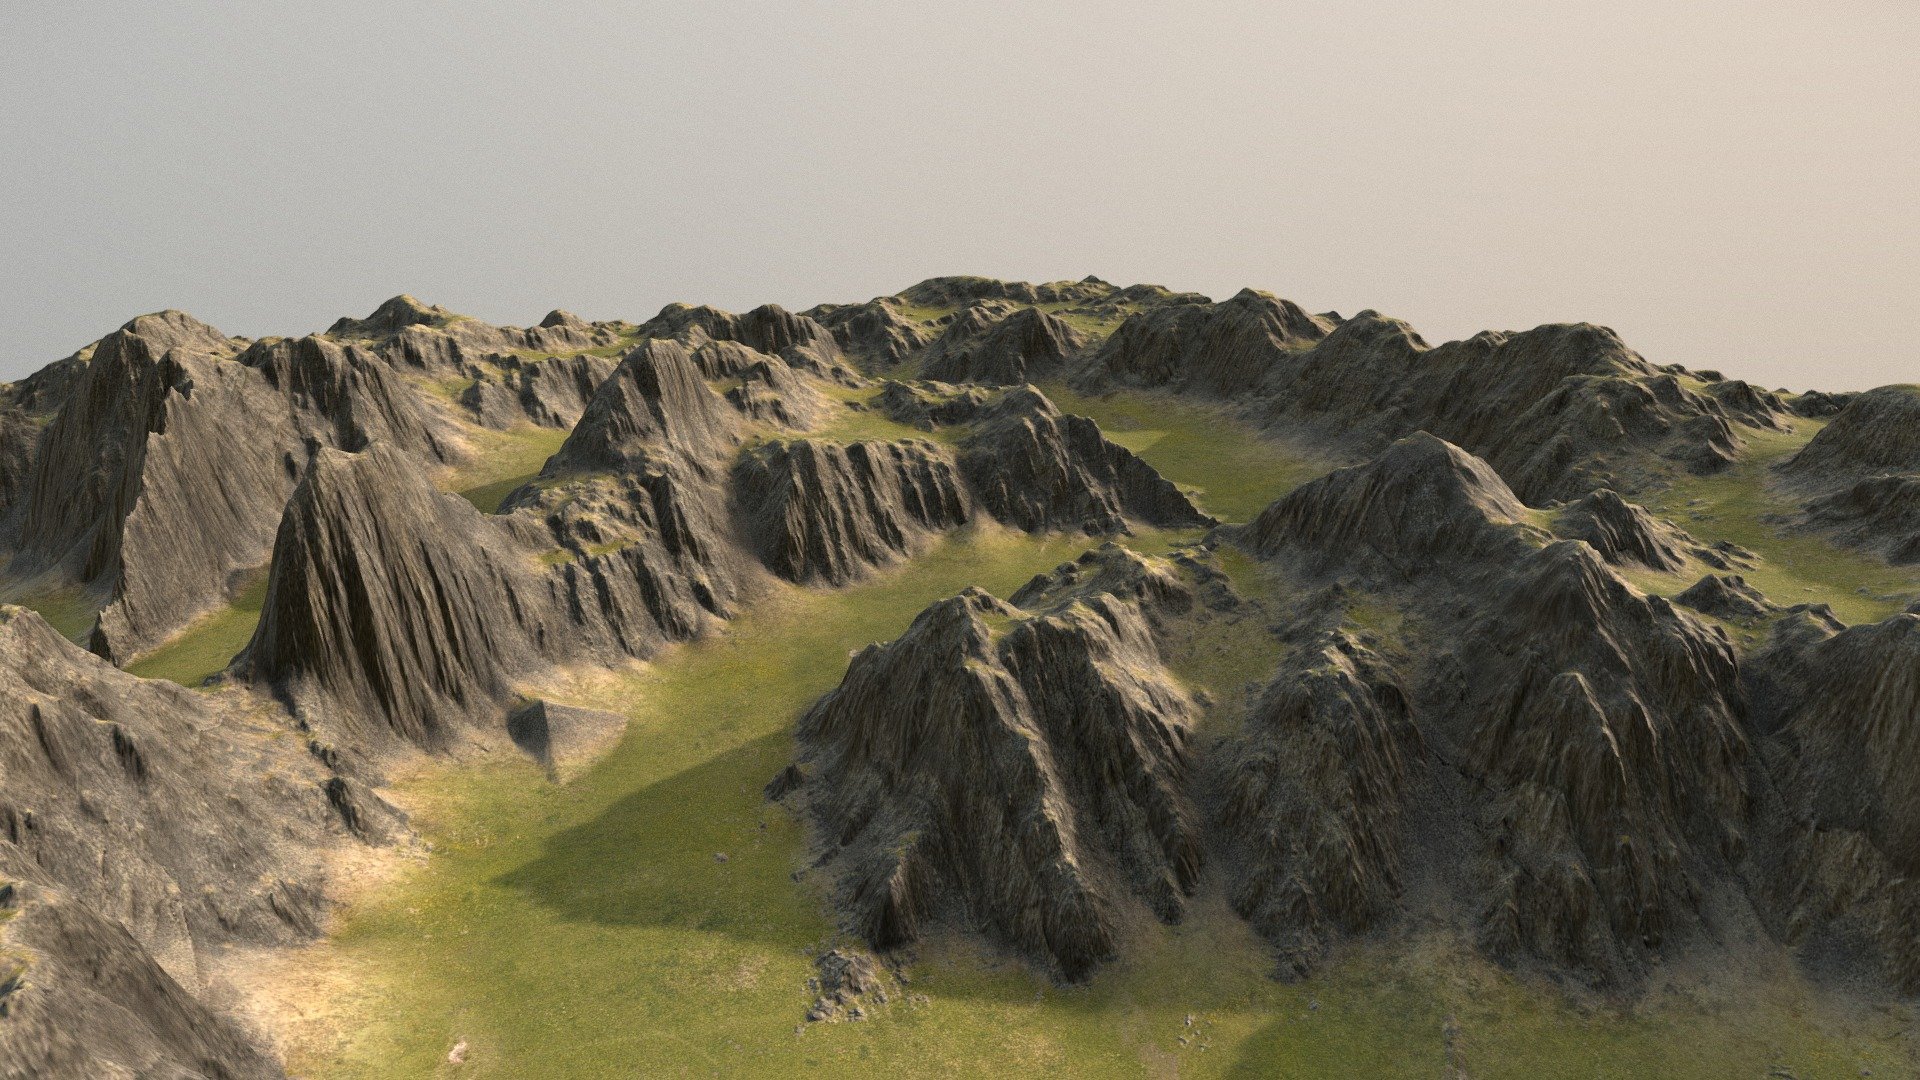 Valley Mountain Path with 4k Textures including Heightmap
Mesh Description: There is a valley surrounded by mountains and there's a  path in between the valley you can view in 3D top view, you can setup city,villages,shops and levels inside your games.
Heightmap along with all the required maps included in the additonal files so you can rasily create your own version of terrain in game engines/3d softwares using the heightmap and texture them according to your requirements.
Thank You!
Like and follow for more models in future! - Valley Mountain Path - Buy Royalty Free 3D model by Nicholas-3D (@Nicholas01) 3d model